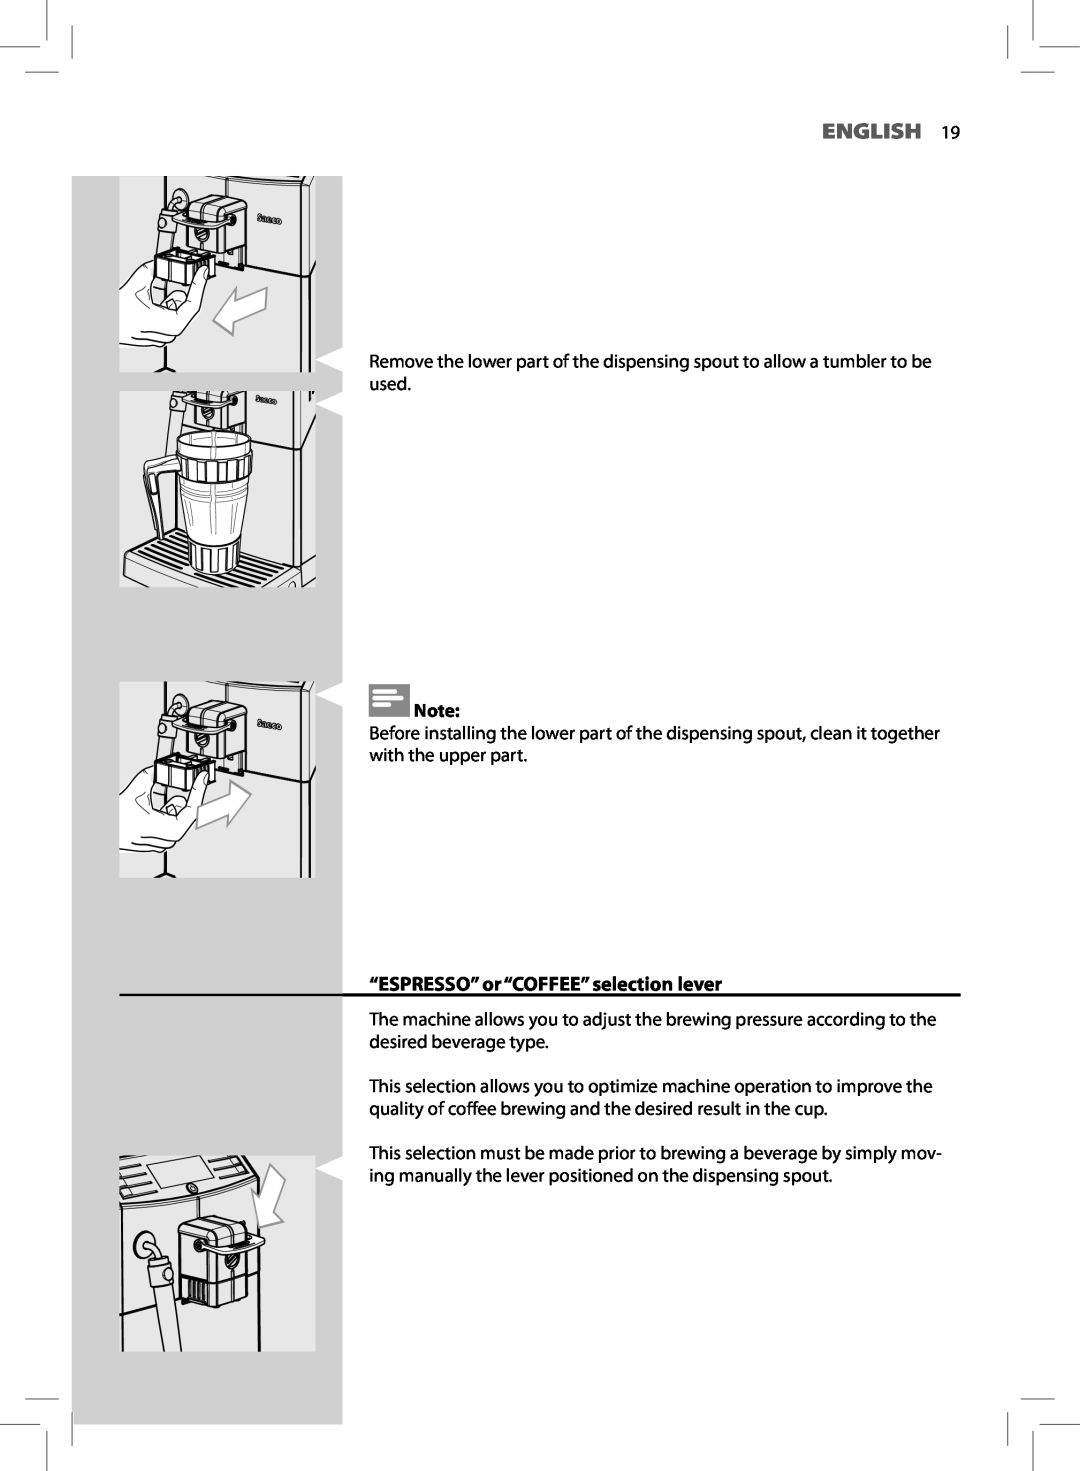 Saeco Coffee Makers HD8775 user manual English, “ESPRESSO” or “COFFEE” selection lever 